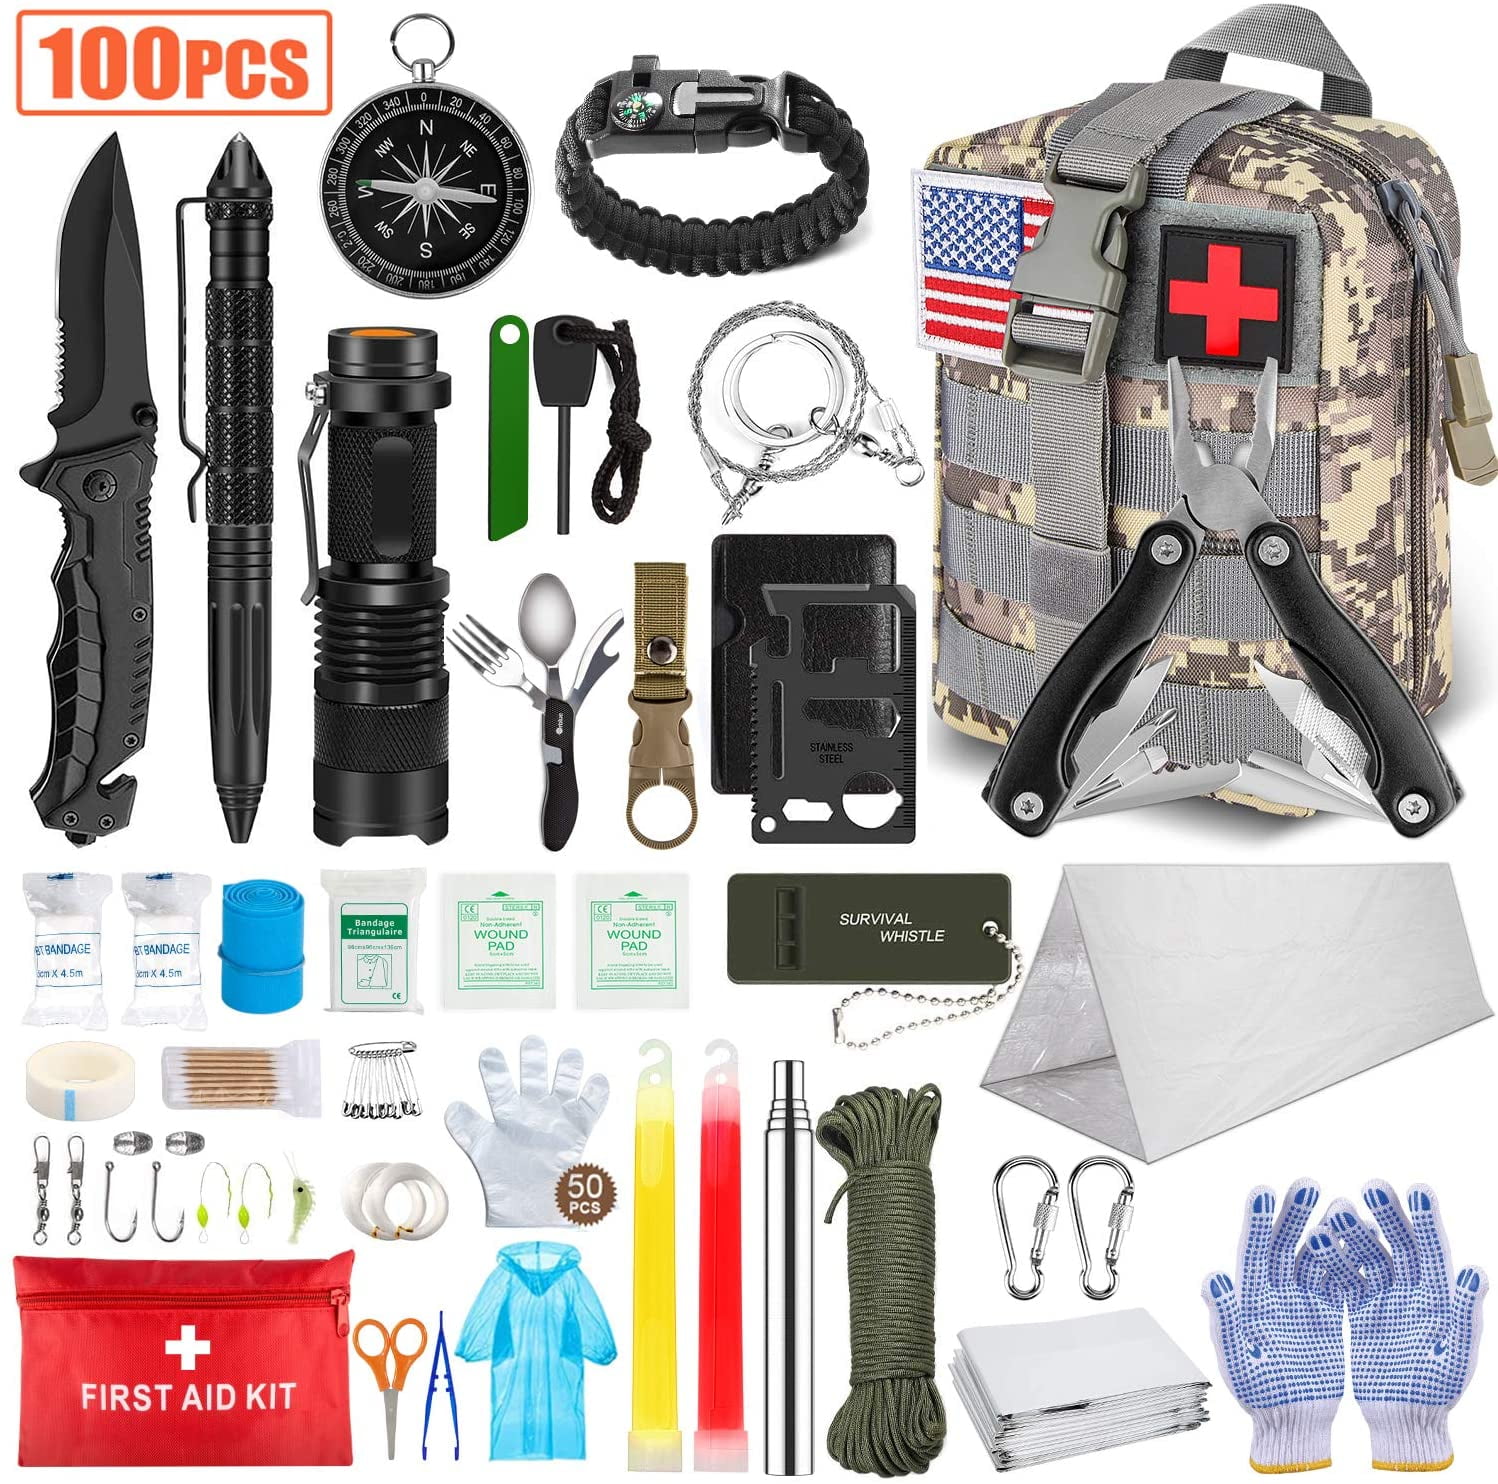 Survival Kit Set Military Outdoor Travel Camping Tools First Aid Box Emergency